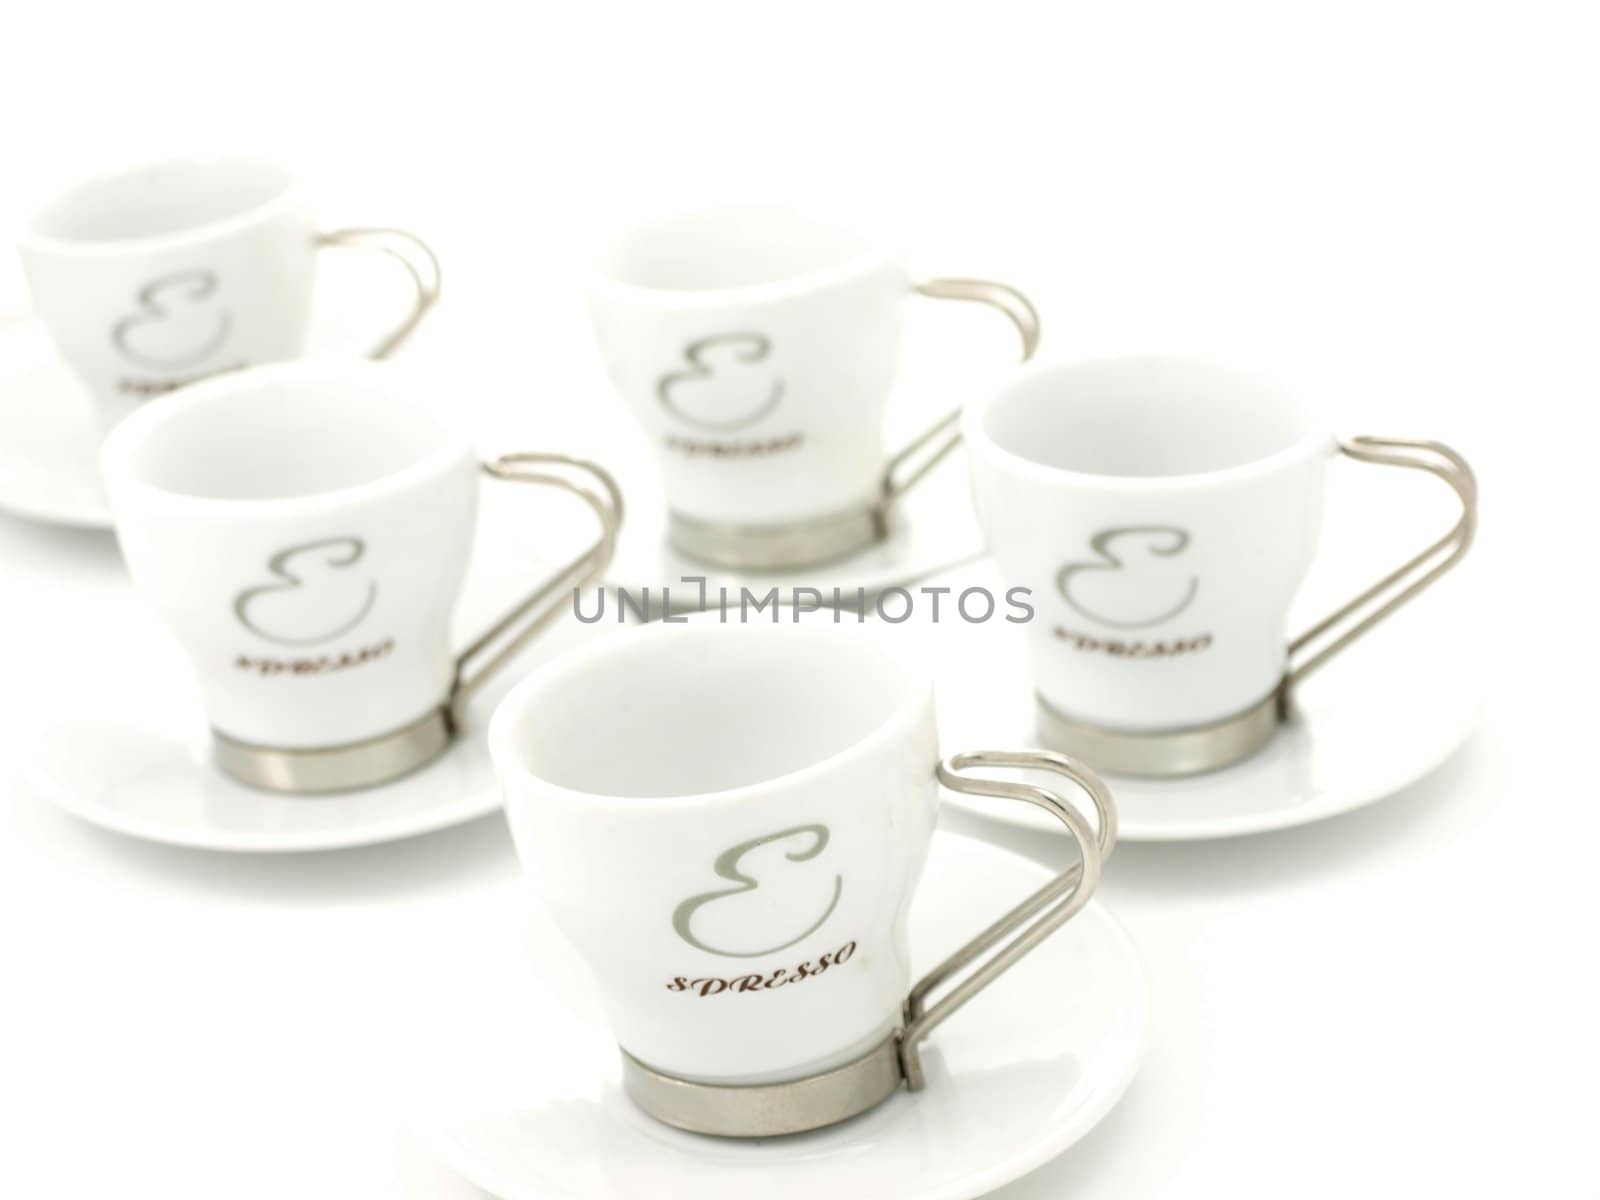 Espresso coffee cups, on plates, towards white